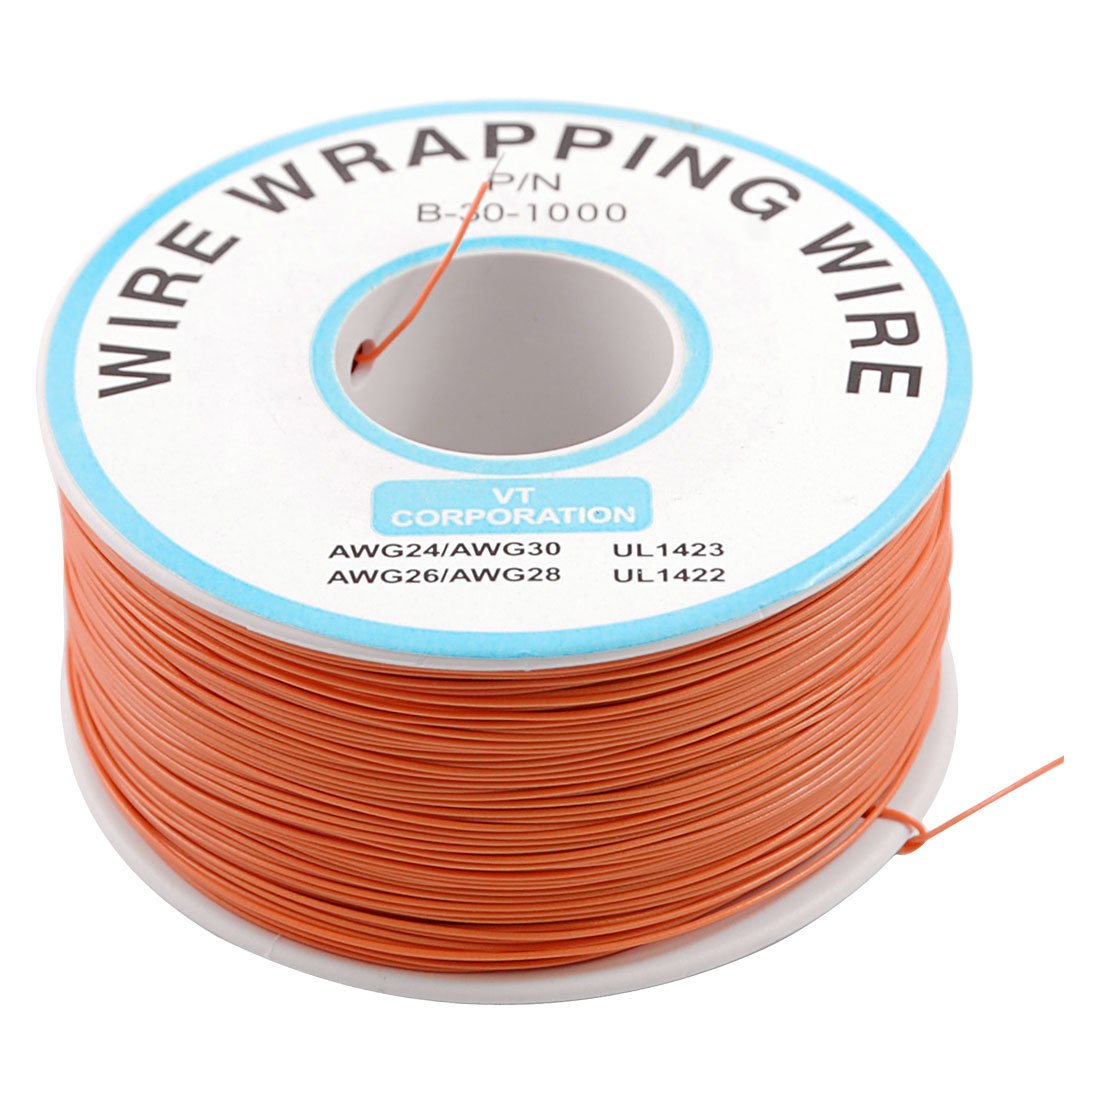 PCB Solder Orange Flexible 0.5mm Outside Dia 30AWG Wire Wrapping Wrap 1000Ft